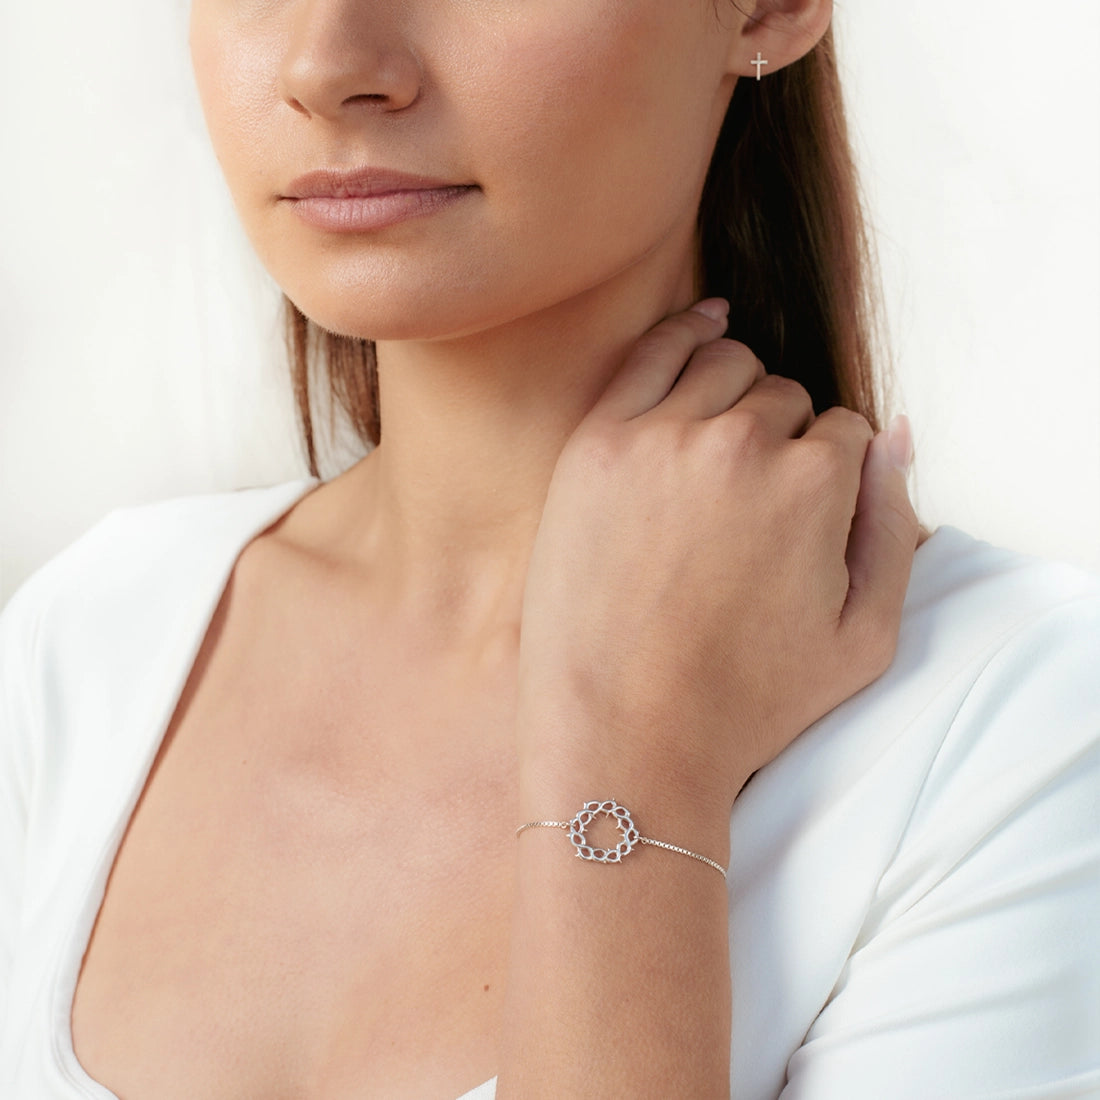 Christian woman wearing a sterling silver Crown of Thorns Bracelet from the Insignia Collection by Rizen Jewelry.